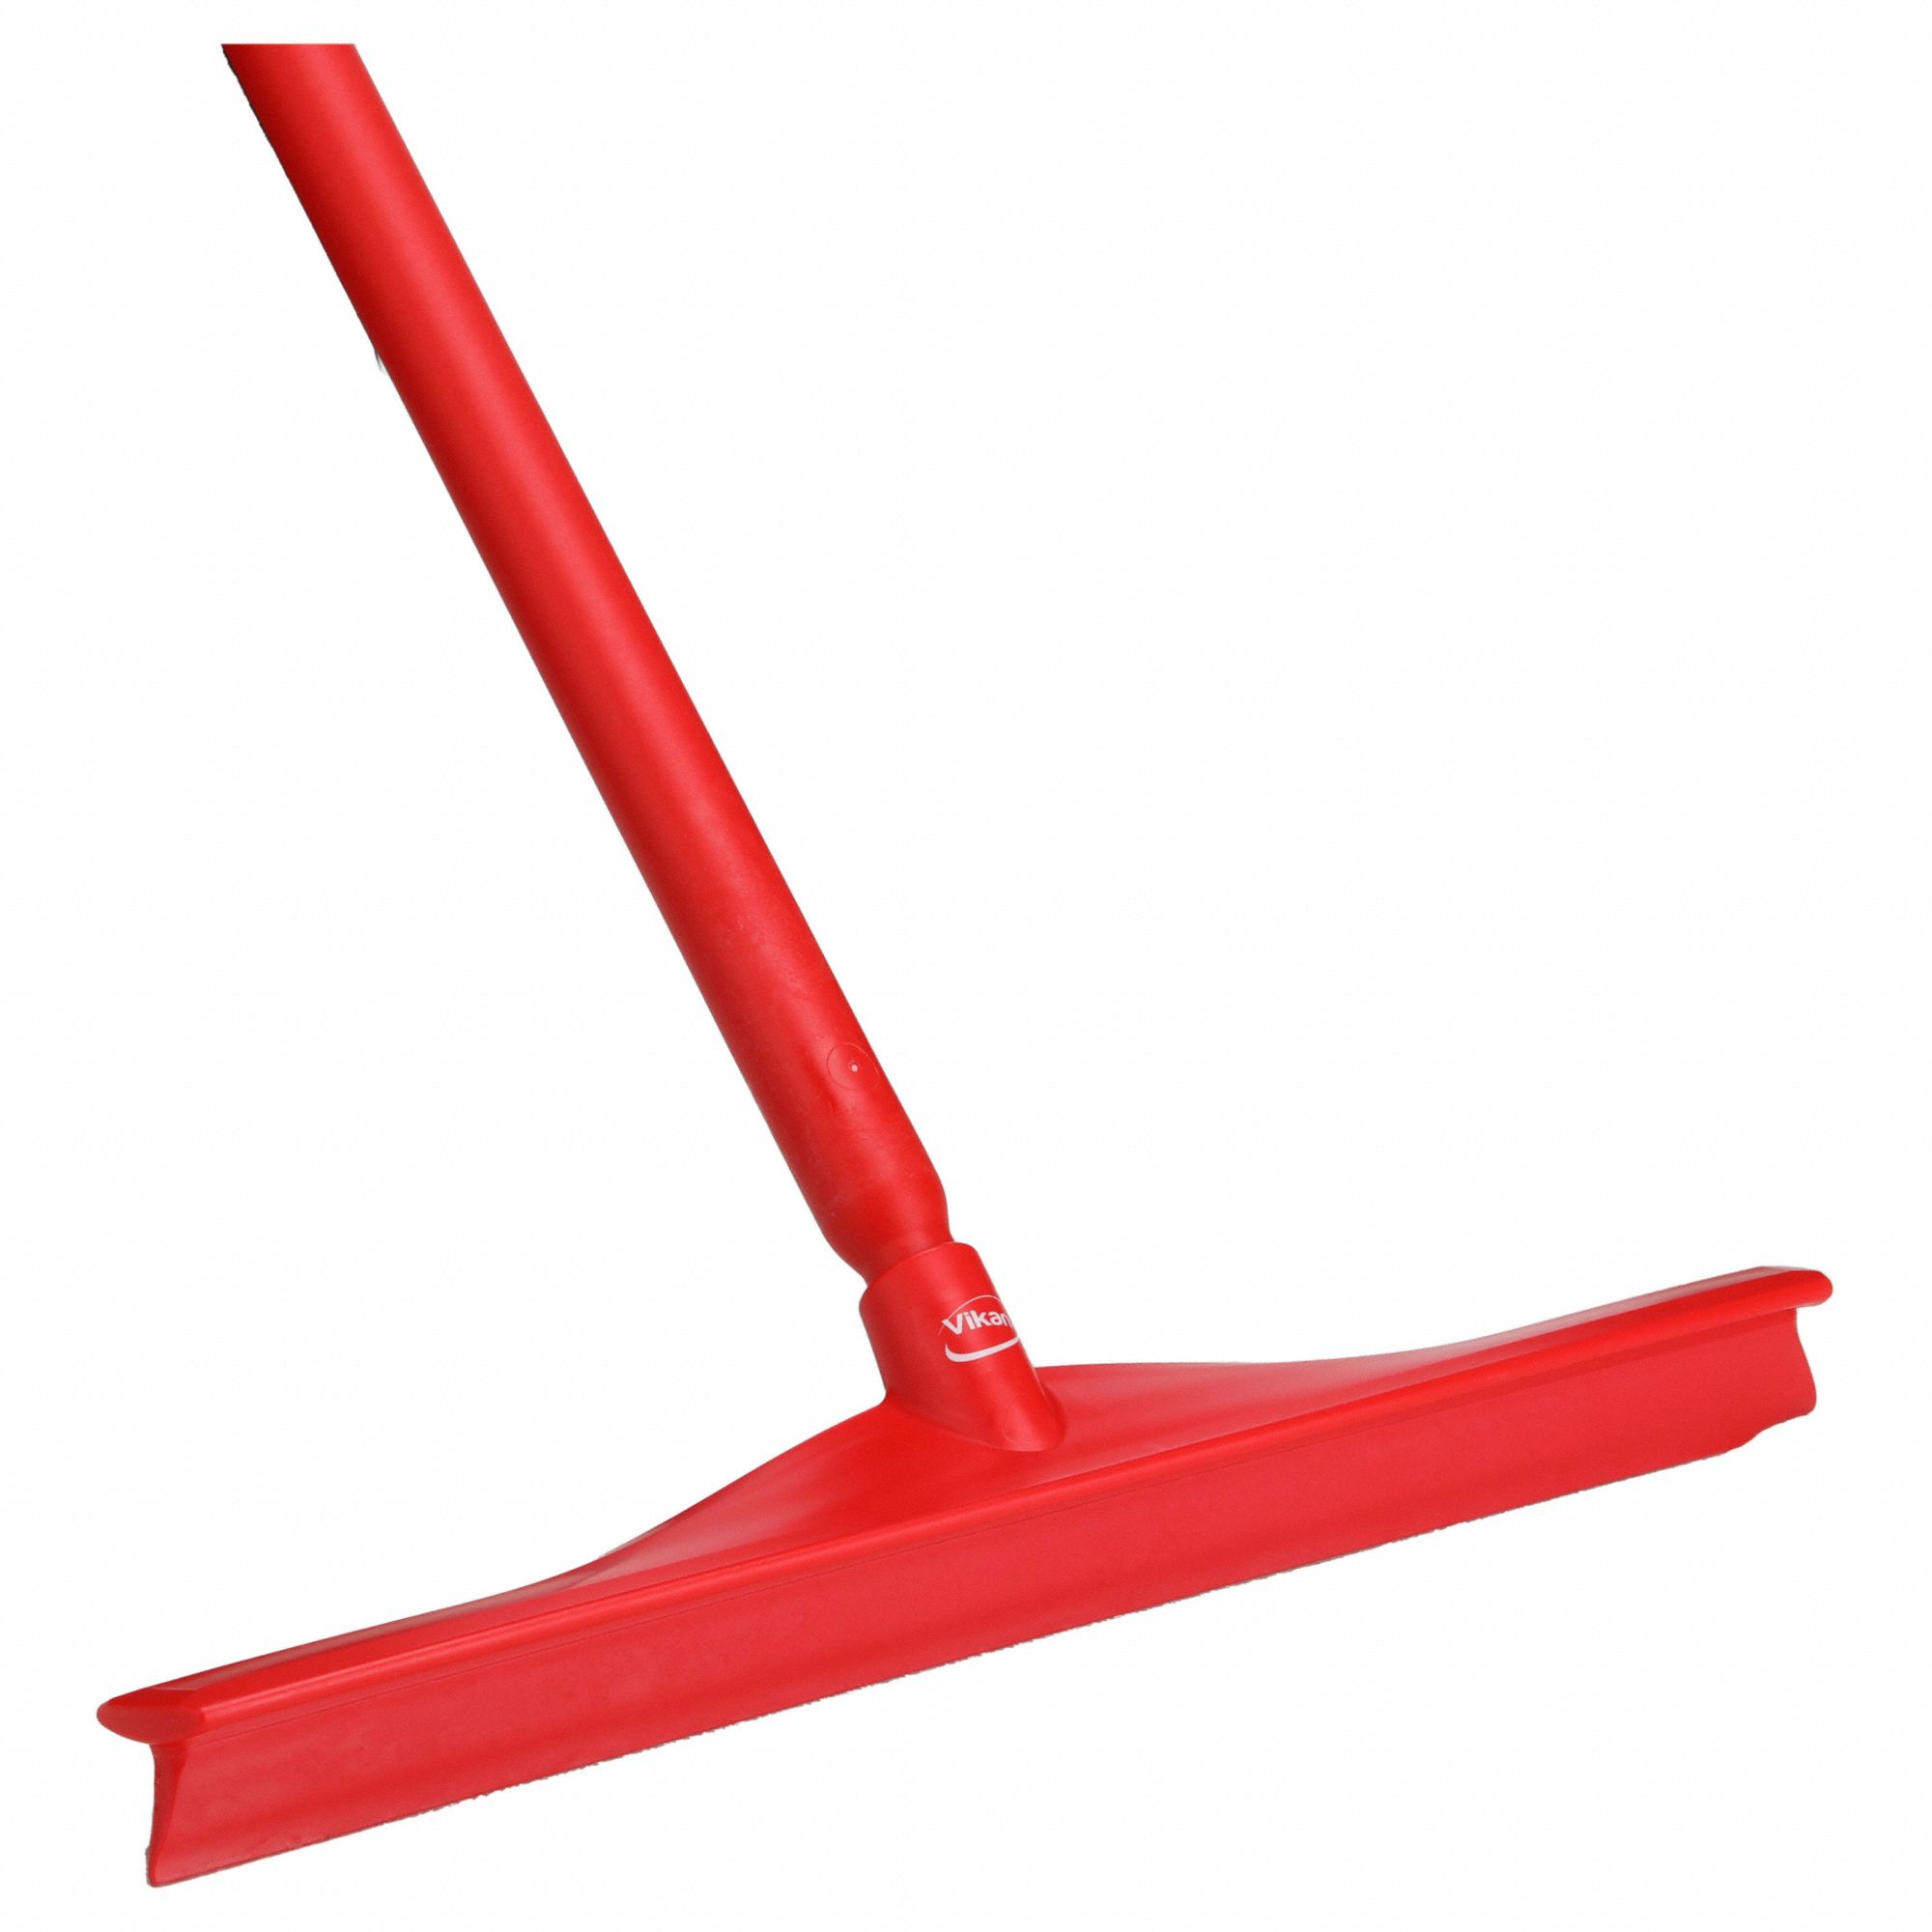 Midwest Rake 36 Non-Absorbent Roller Squeegee, 60 Handle